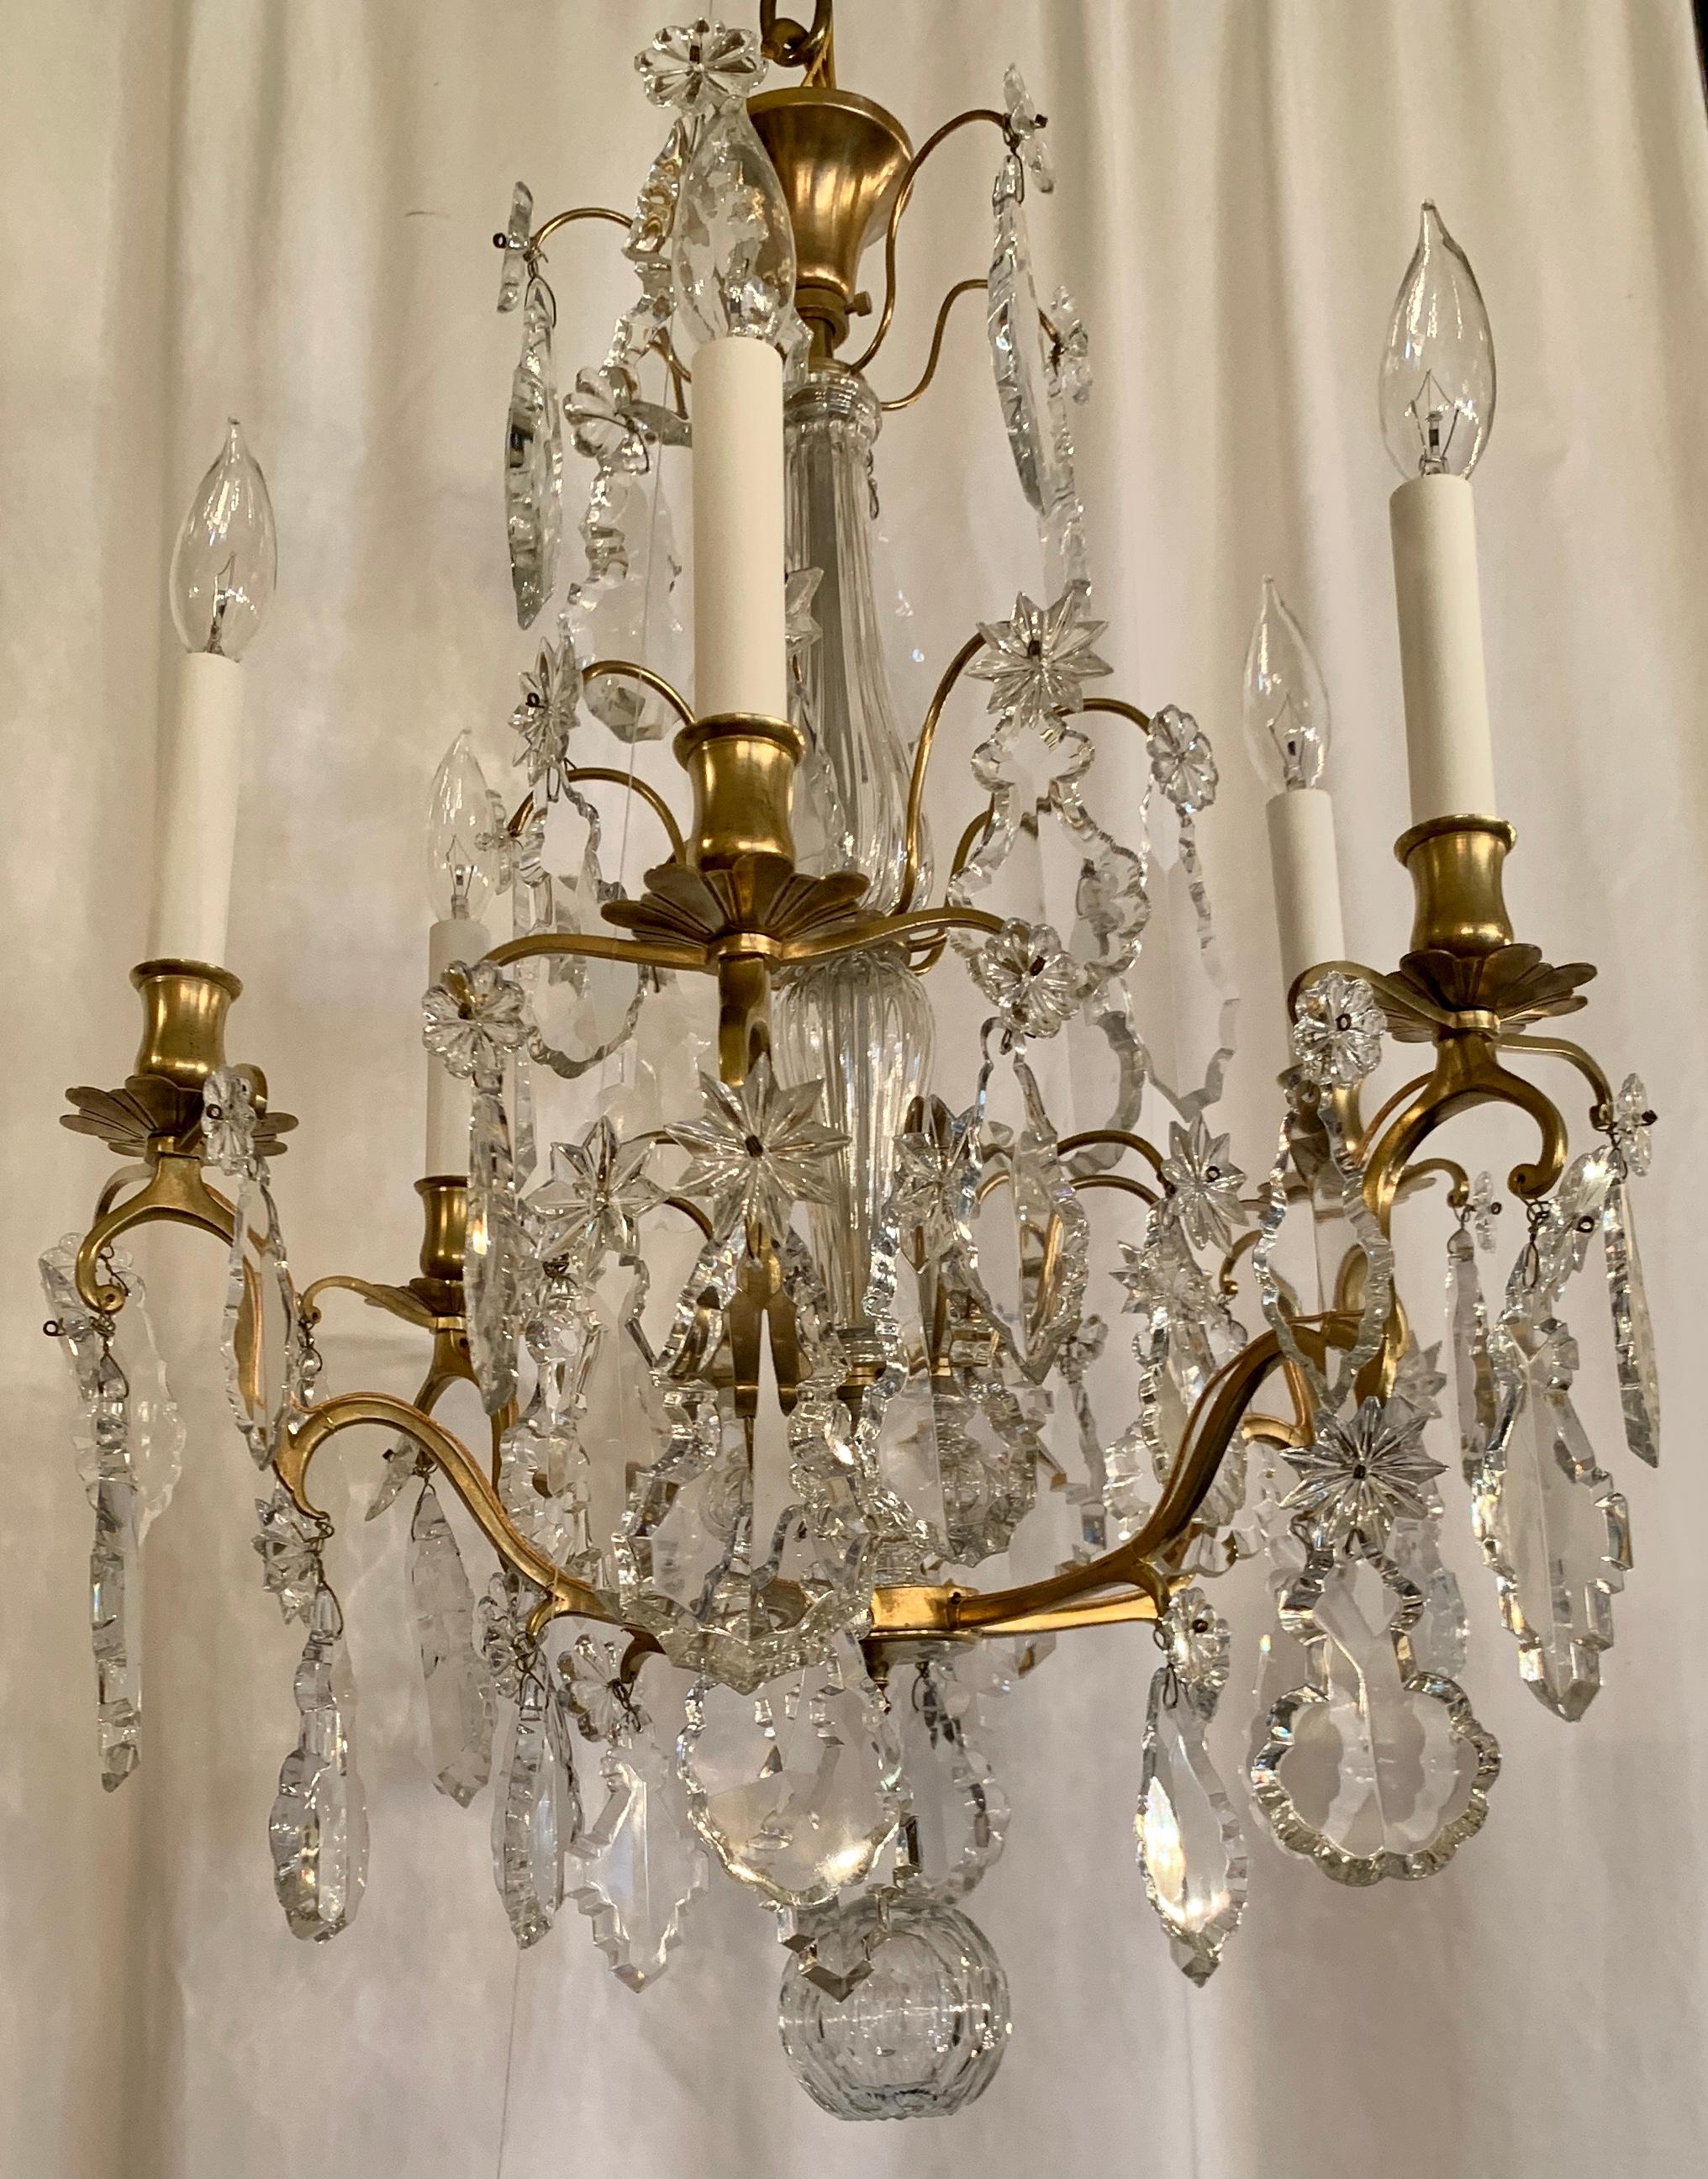 Antique French gold bronze and crystal chandelier, Circa 1890-1900.